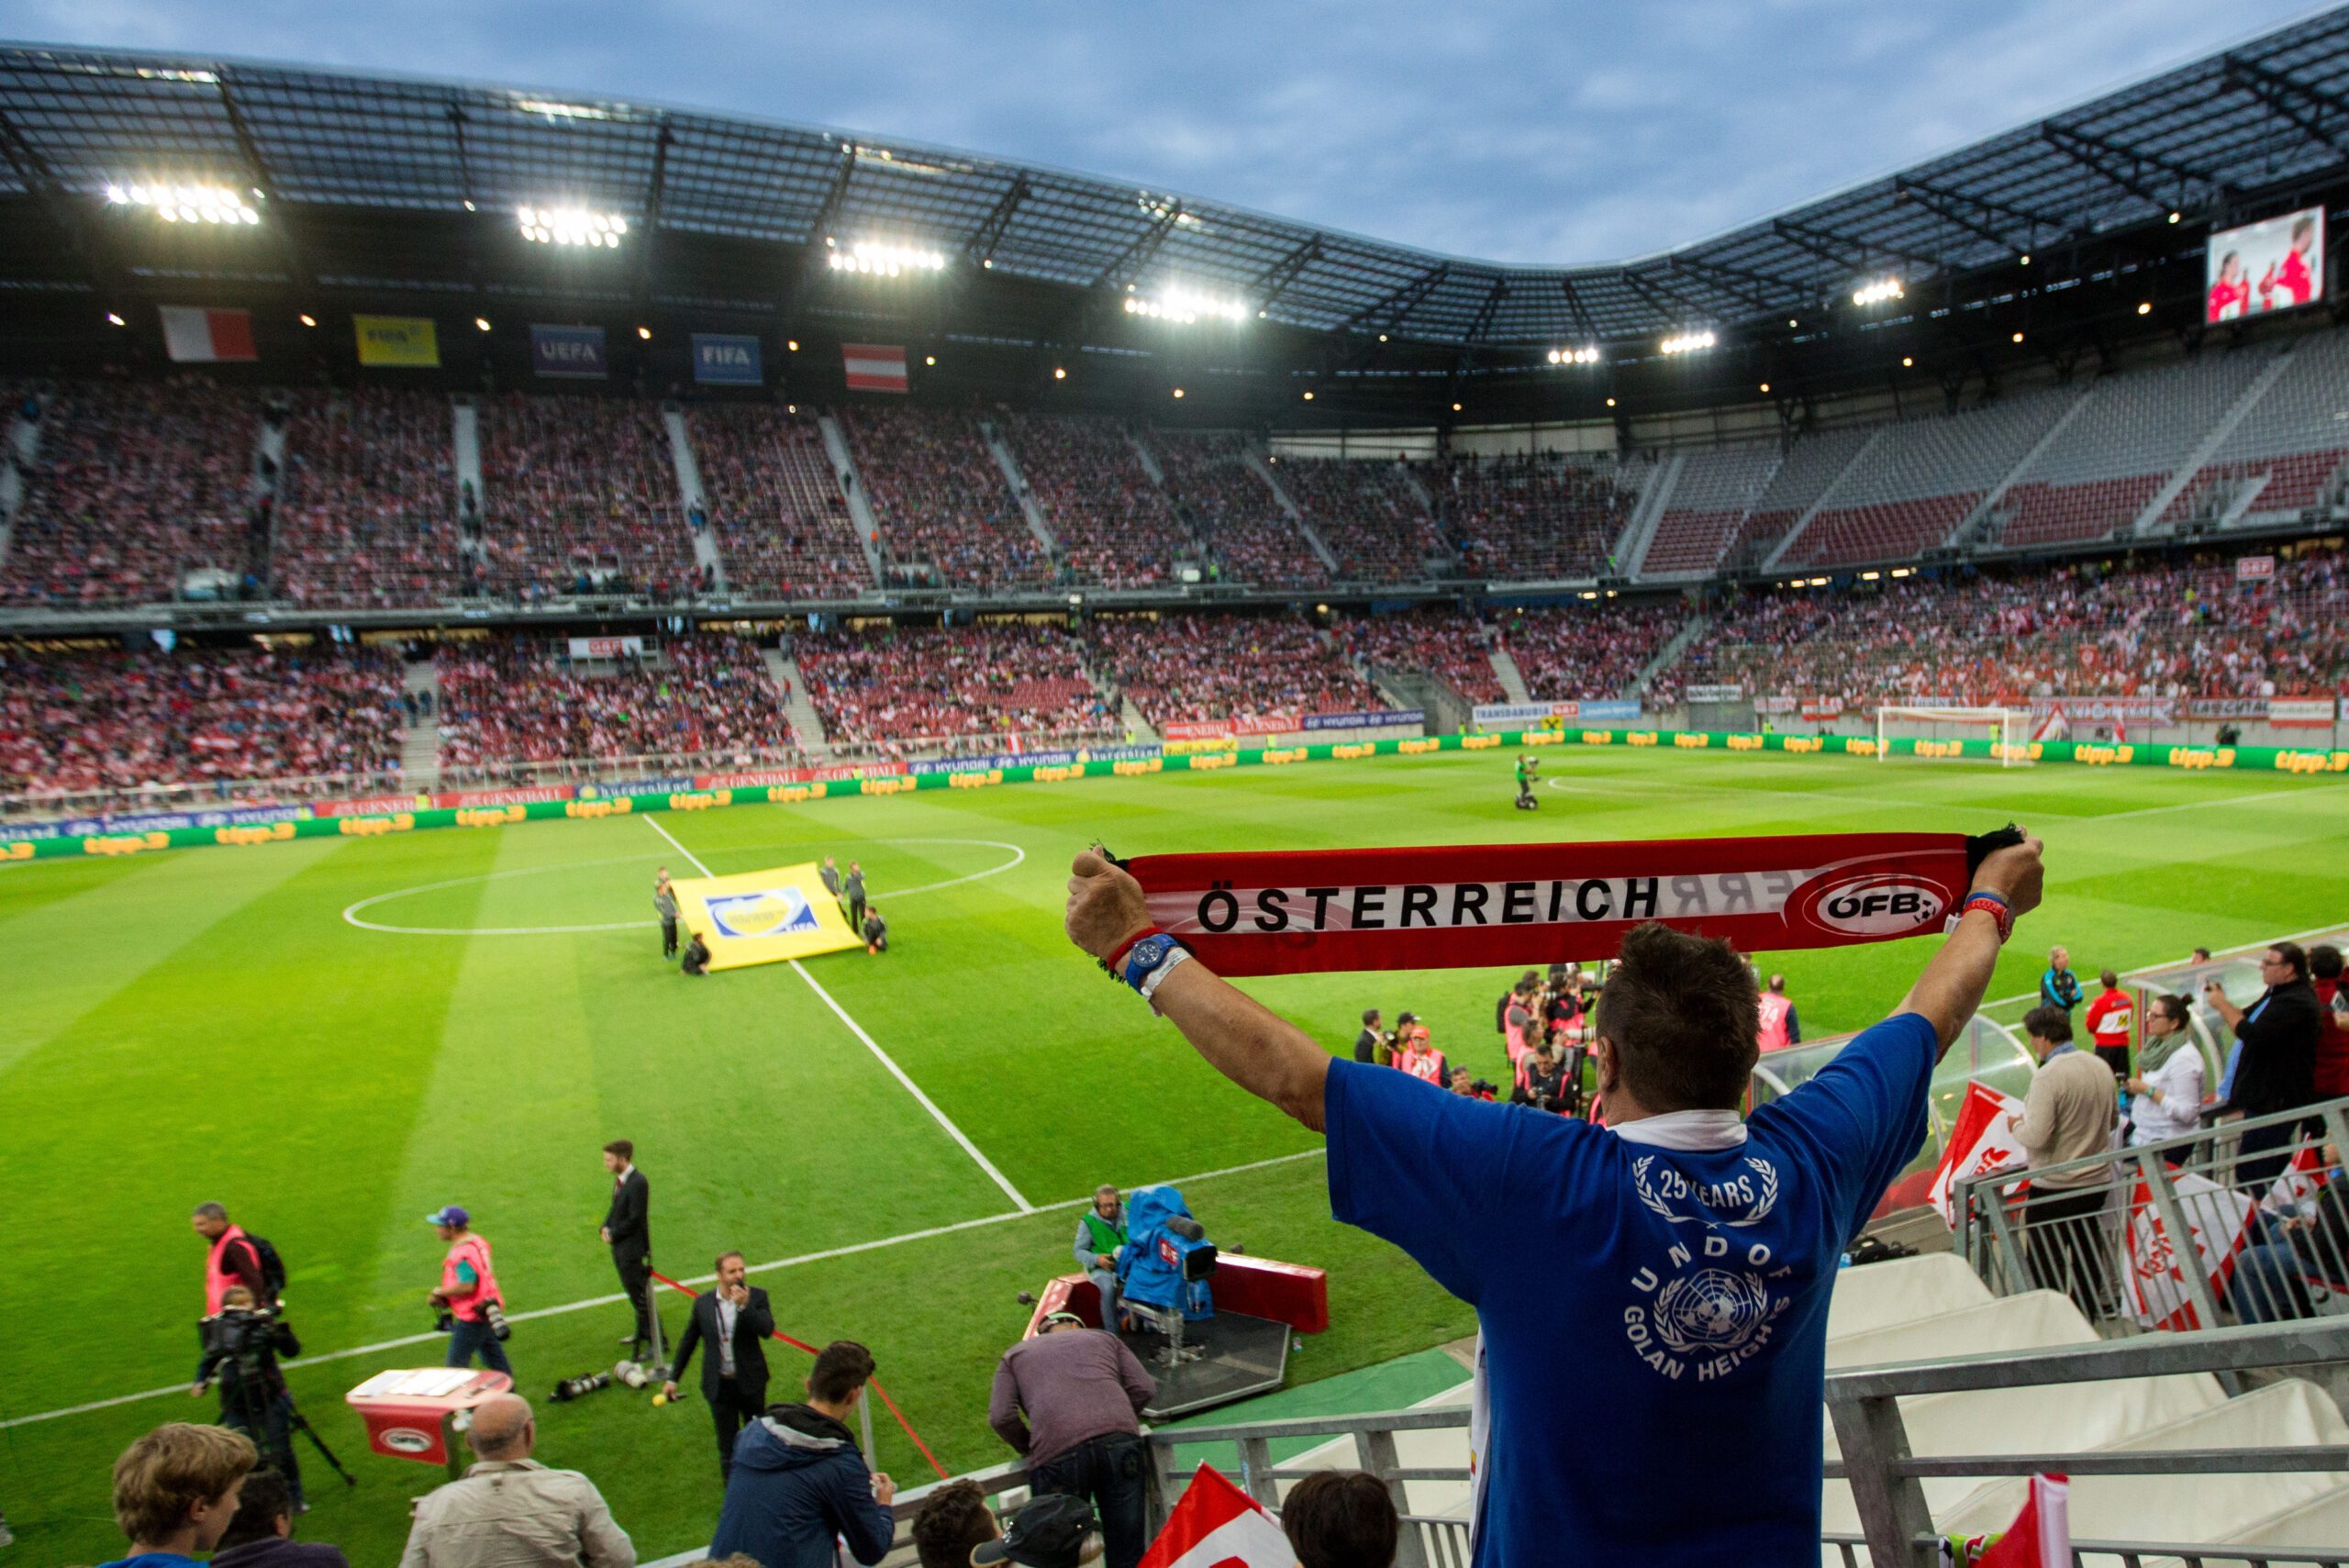 KLAGENFURT,AUSTRIA,31.MAY.16 - SOCCER - UEFA European Championship 2016 in France, OEFB international match, friendly match, Austria vs Malta. Image shows a fan with a scarf and a general view of the Woerthersee Stadium.